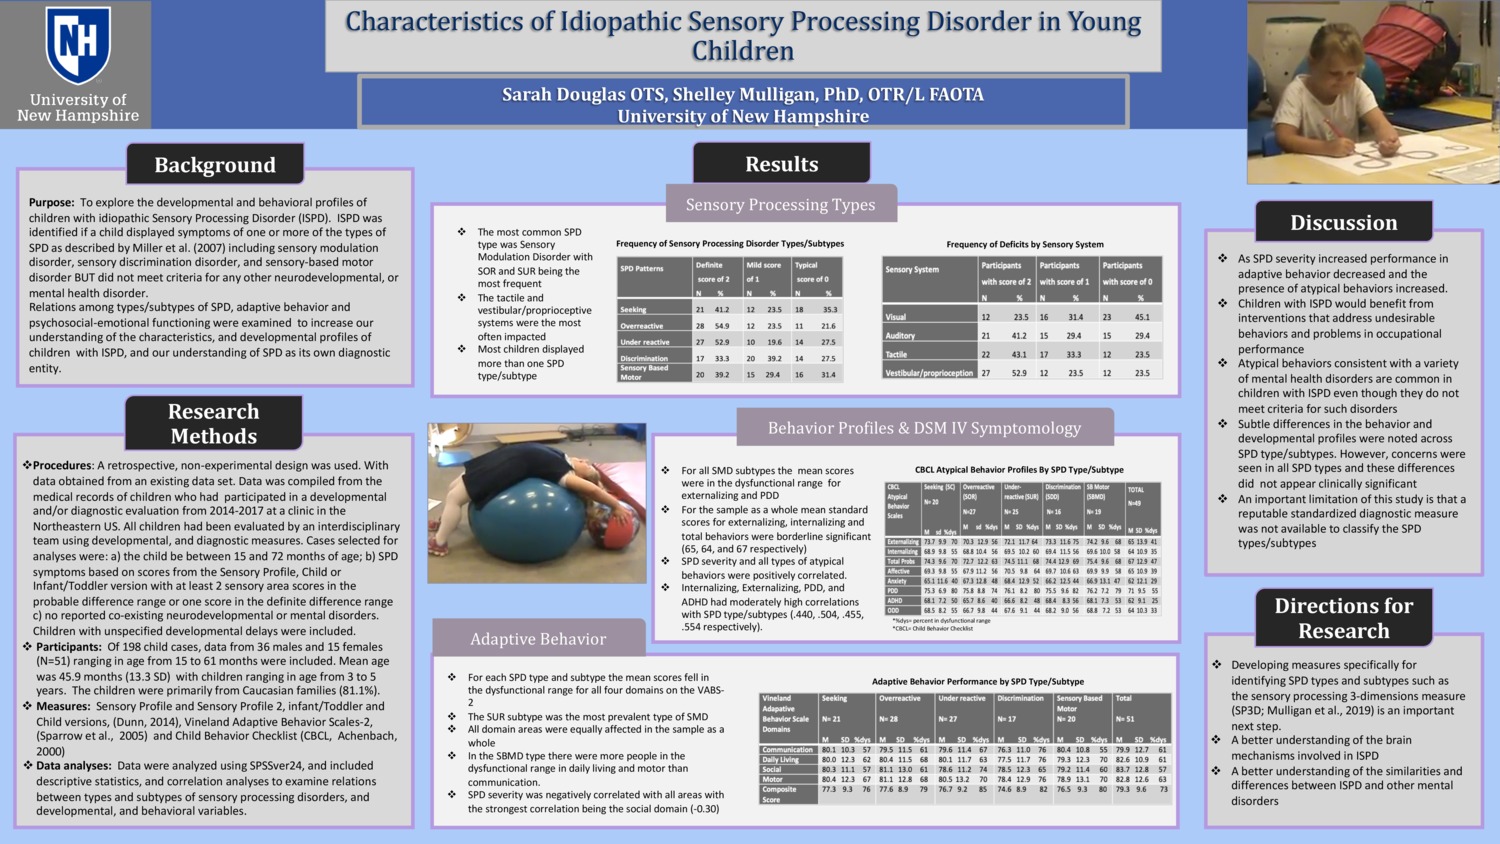 Characteristics Of Idiopathic Sensory Processing Disorder In Young Children by sld1026